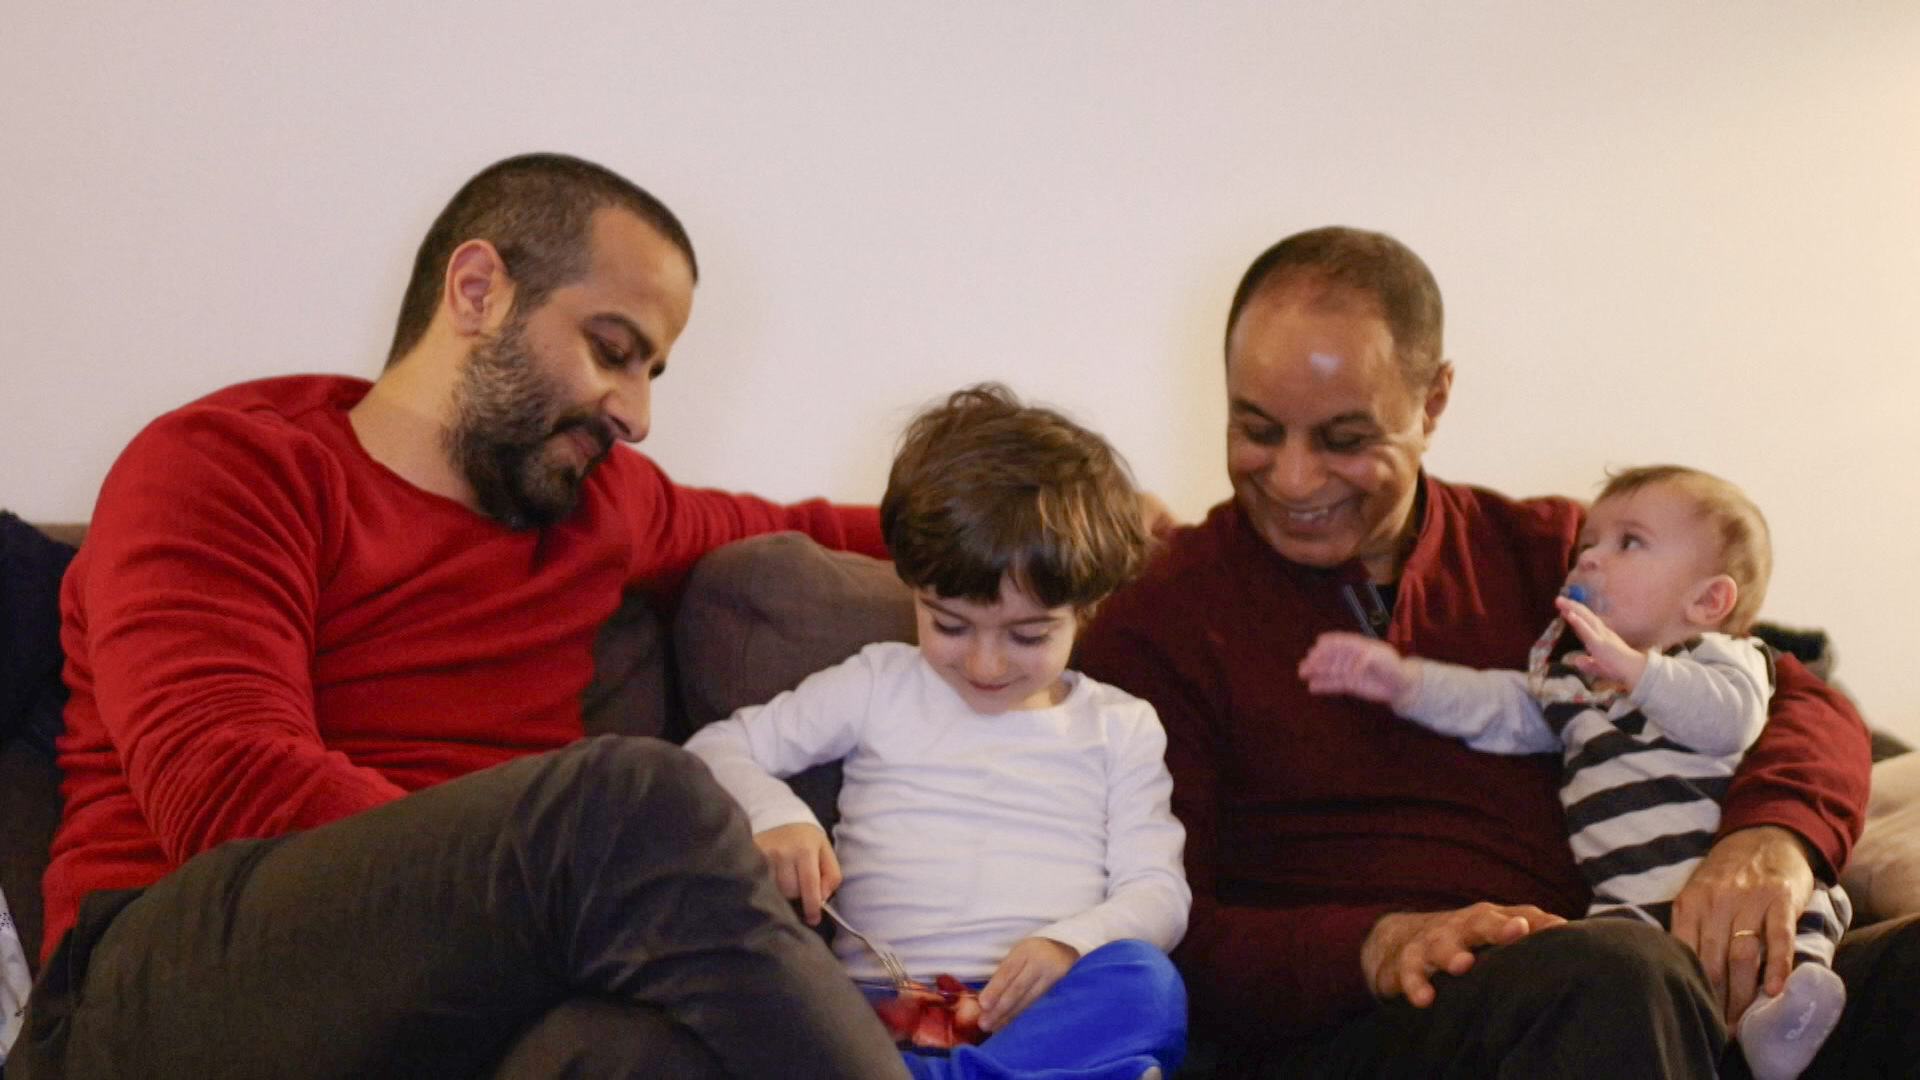 My Father, Nour and I: Confronting intergenerational trauma | Saddam Hussein [Video]